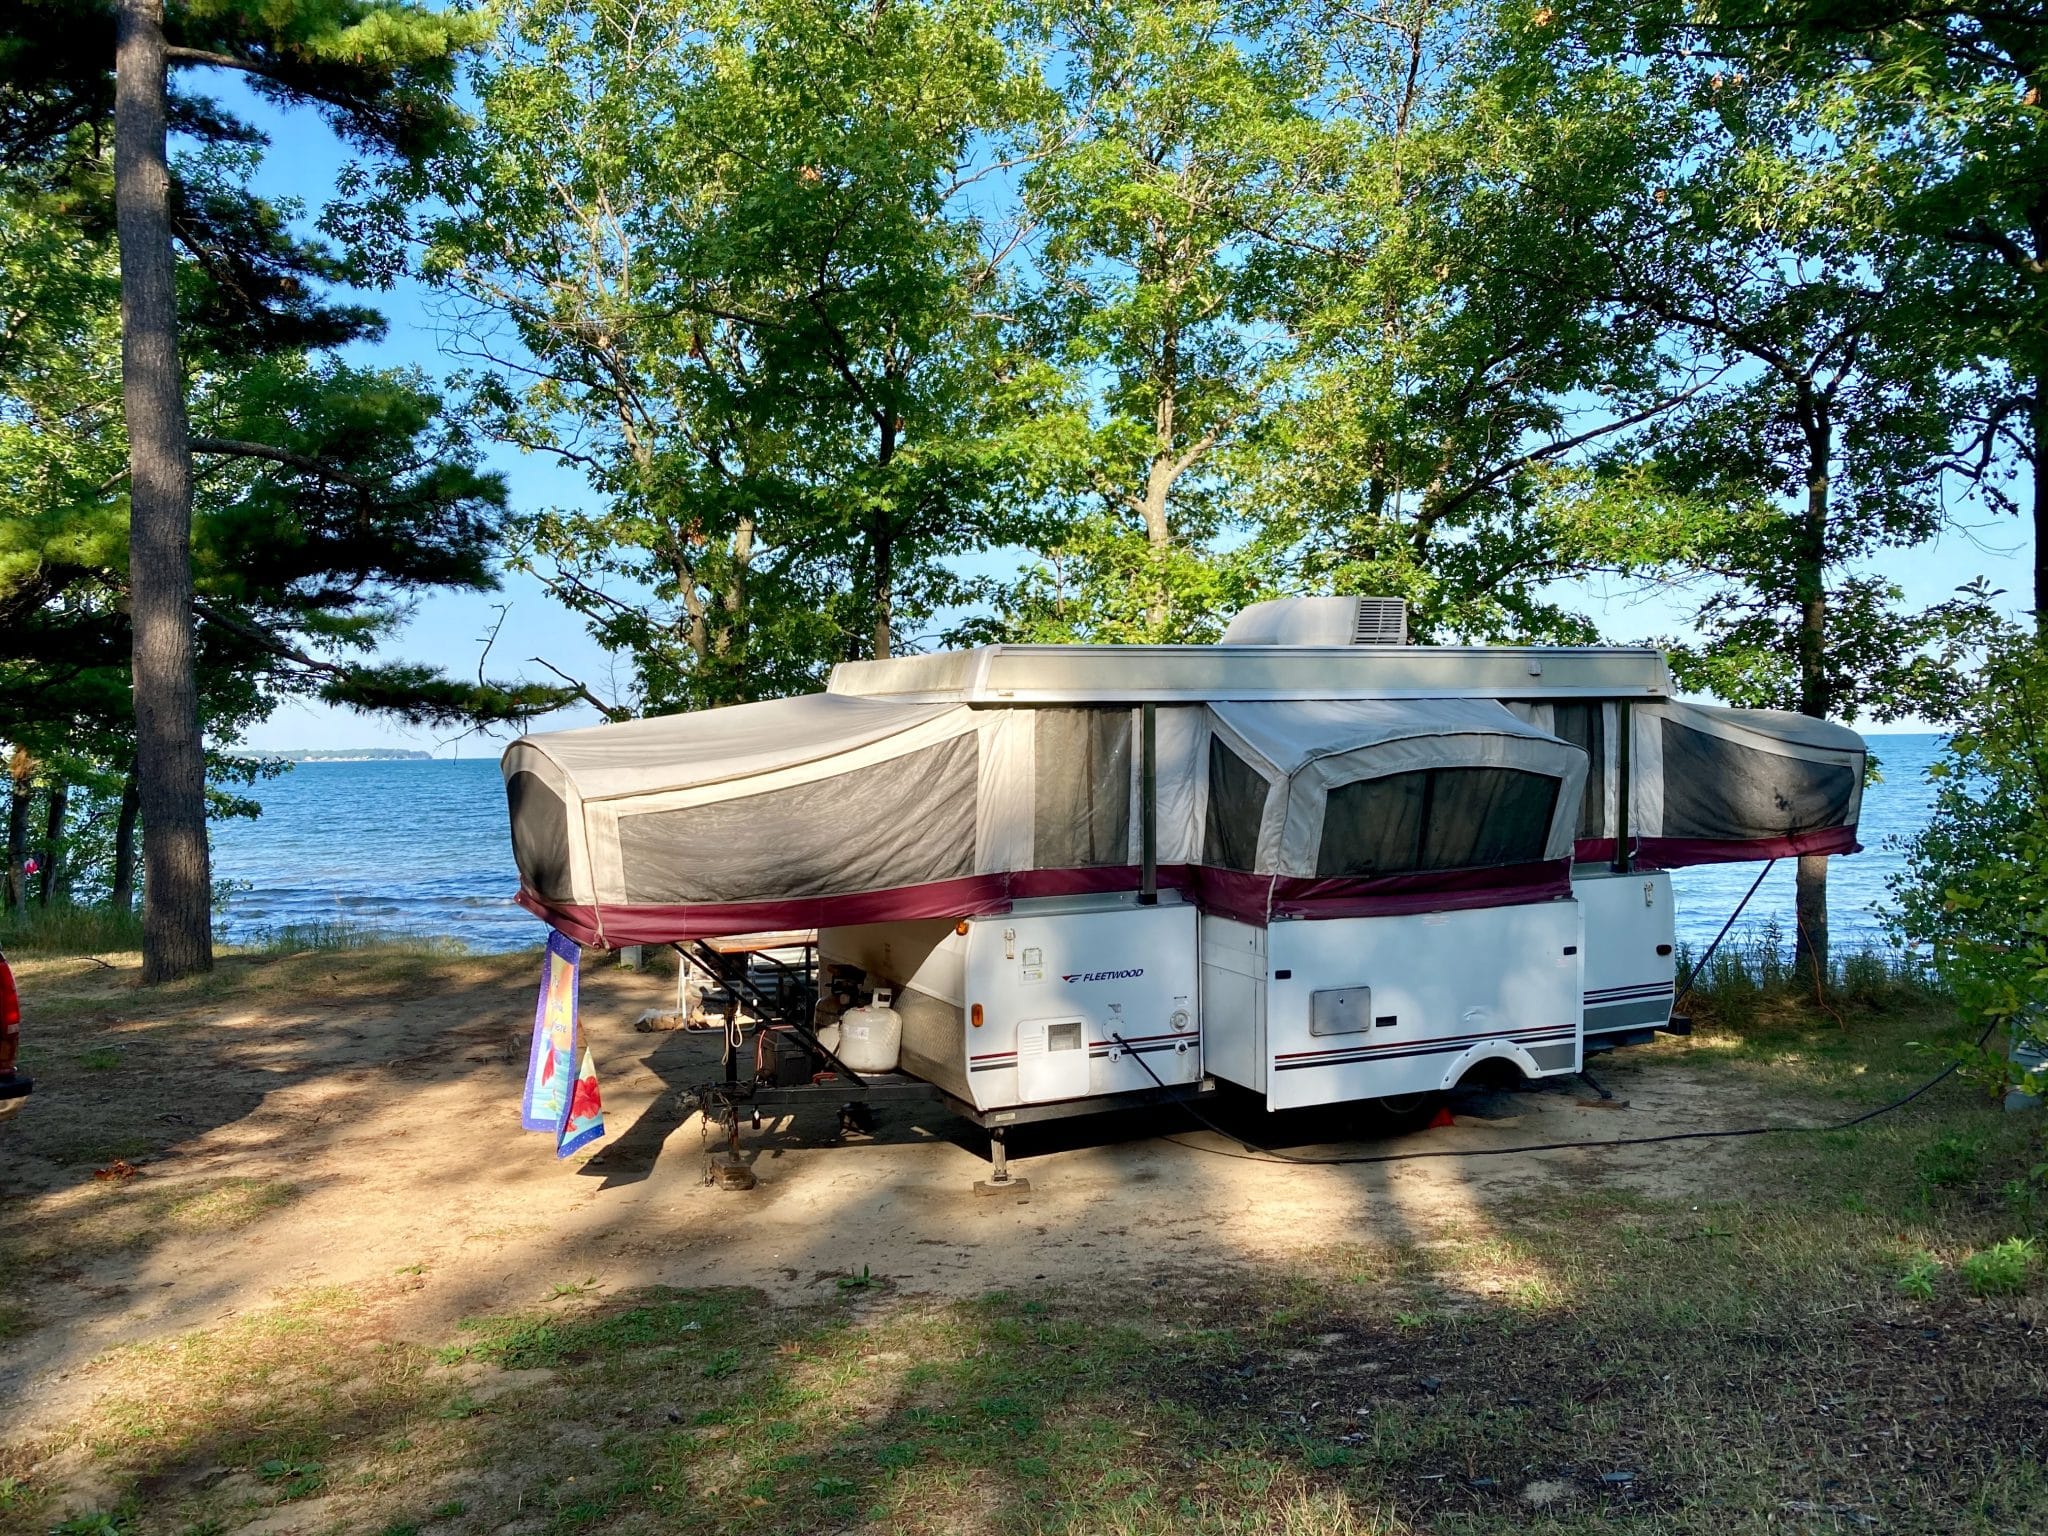 RV Rental in Michigan State Parks – 9 Motivations To Consider